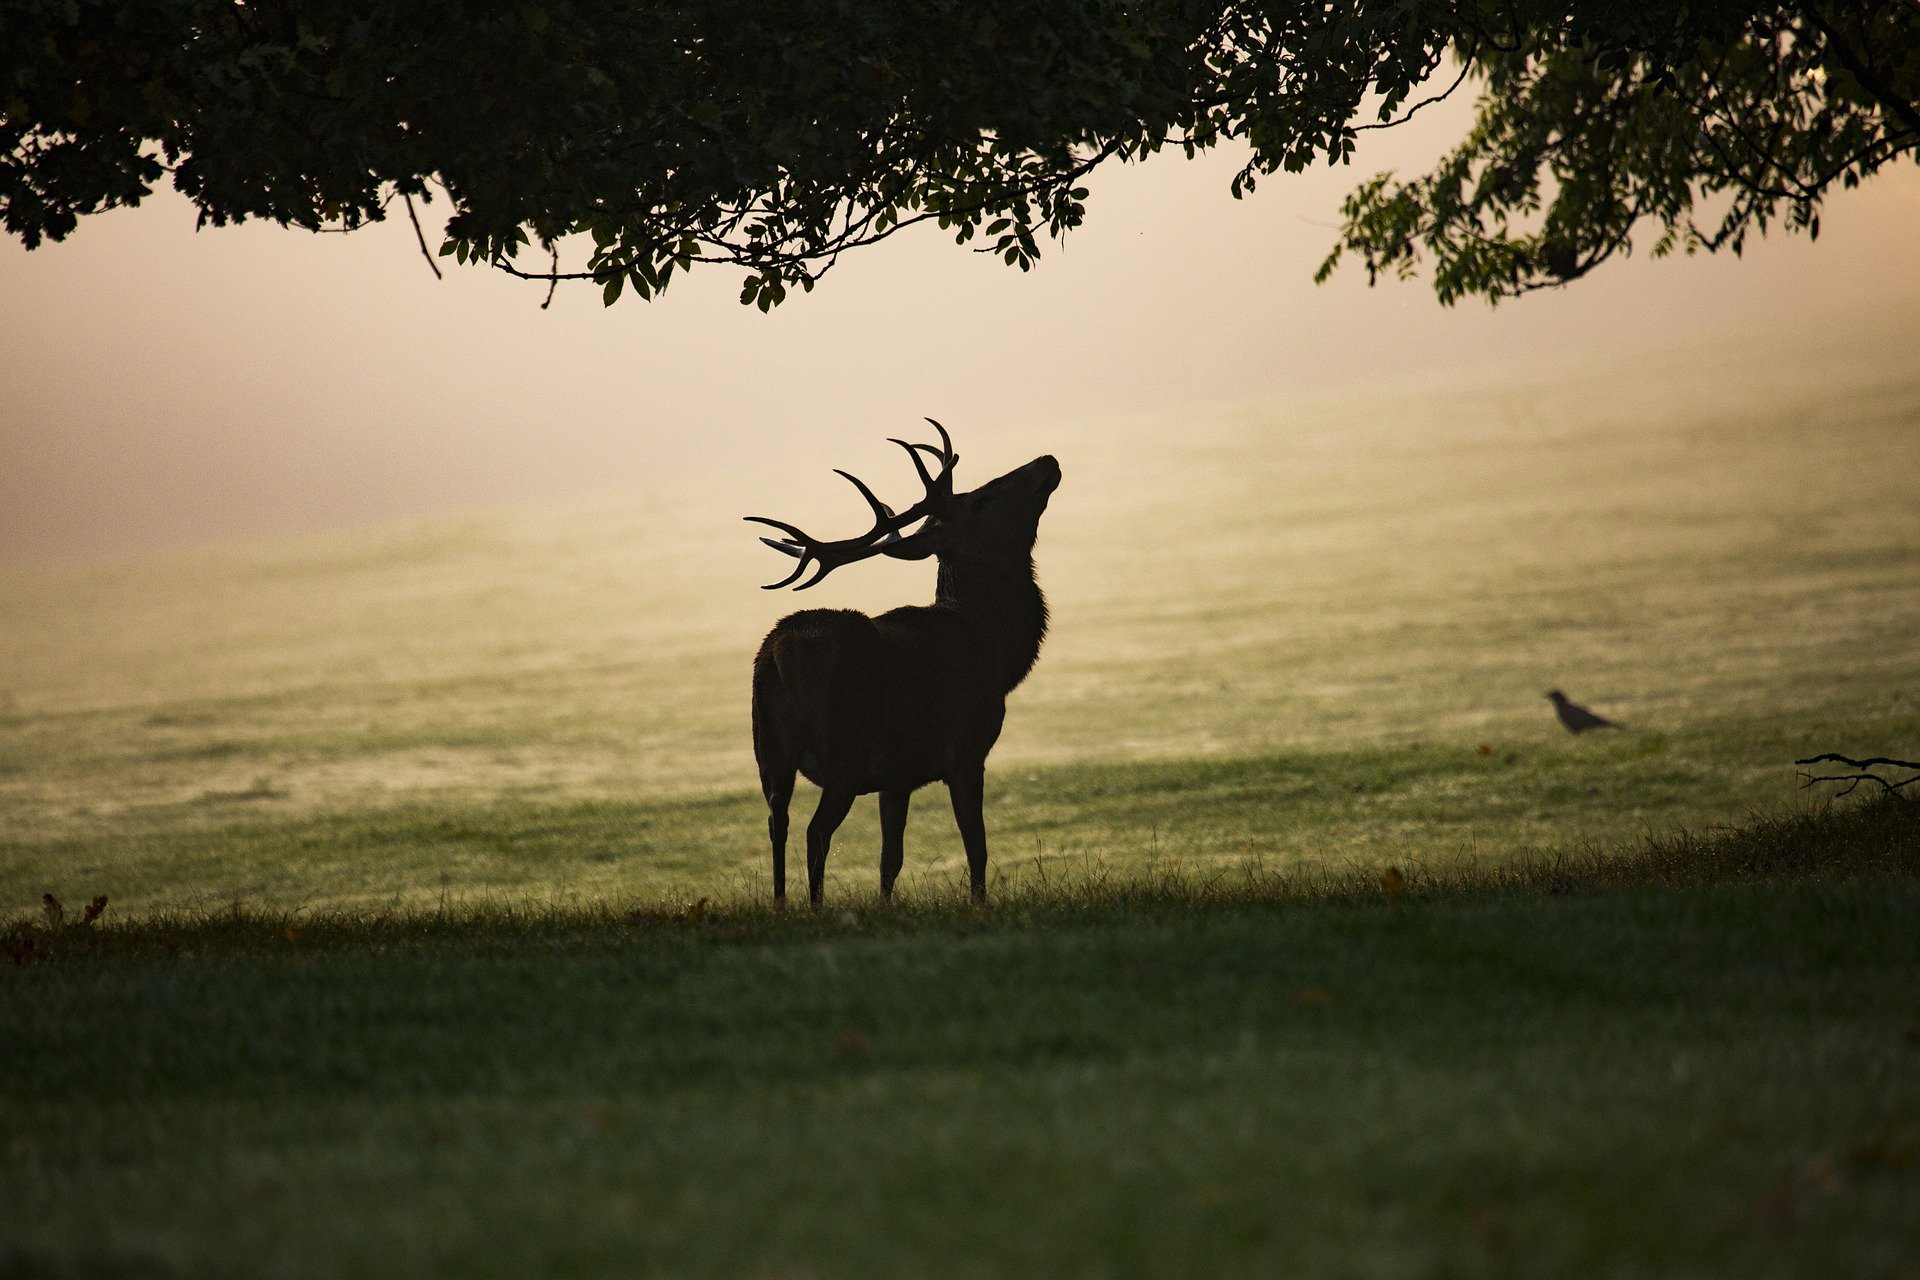 A large stage pictured in silhouette under a tree. In the background, a fog is beginning to blanket the field in which the stag is standing.